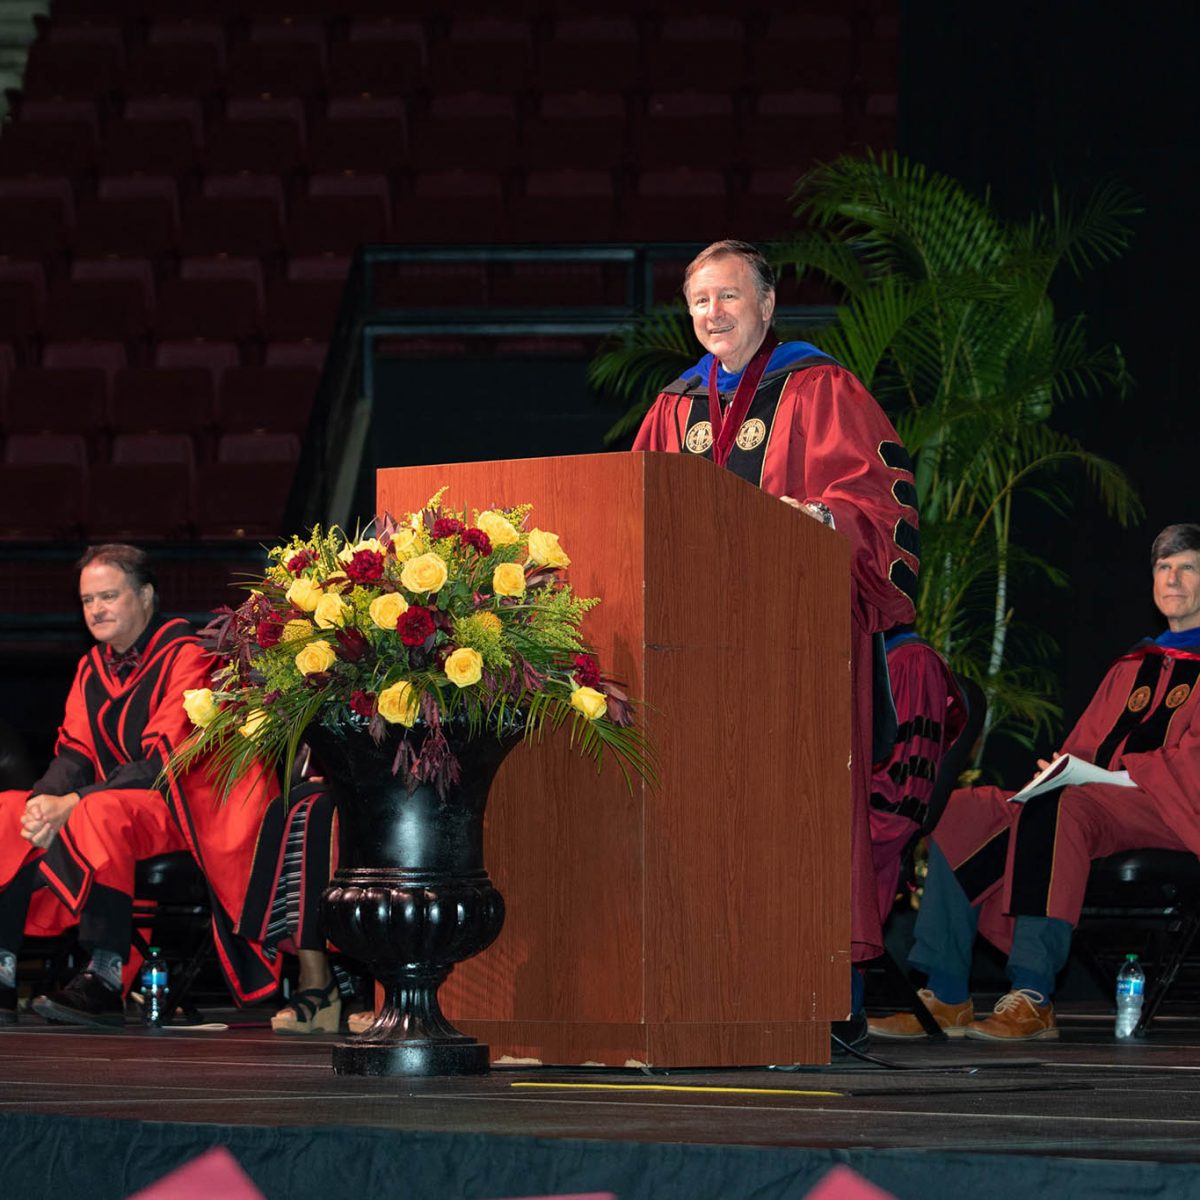 Florida State University President Richard McCullough welcomes graduates and guests at the summer commencement ceremony Friday, Aug. 4 at the Donald L. Tucker Civic Center. (FSU Photography Services)